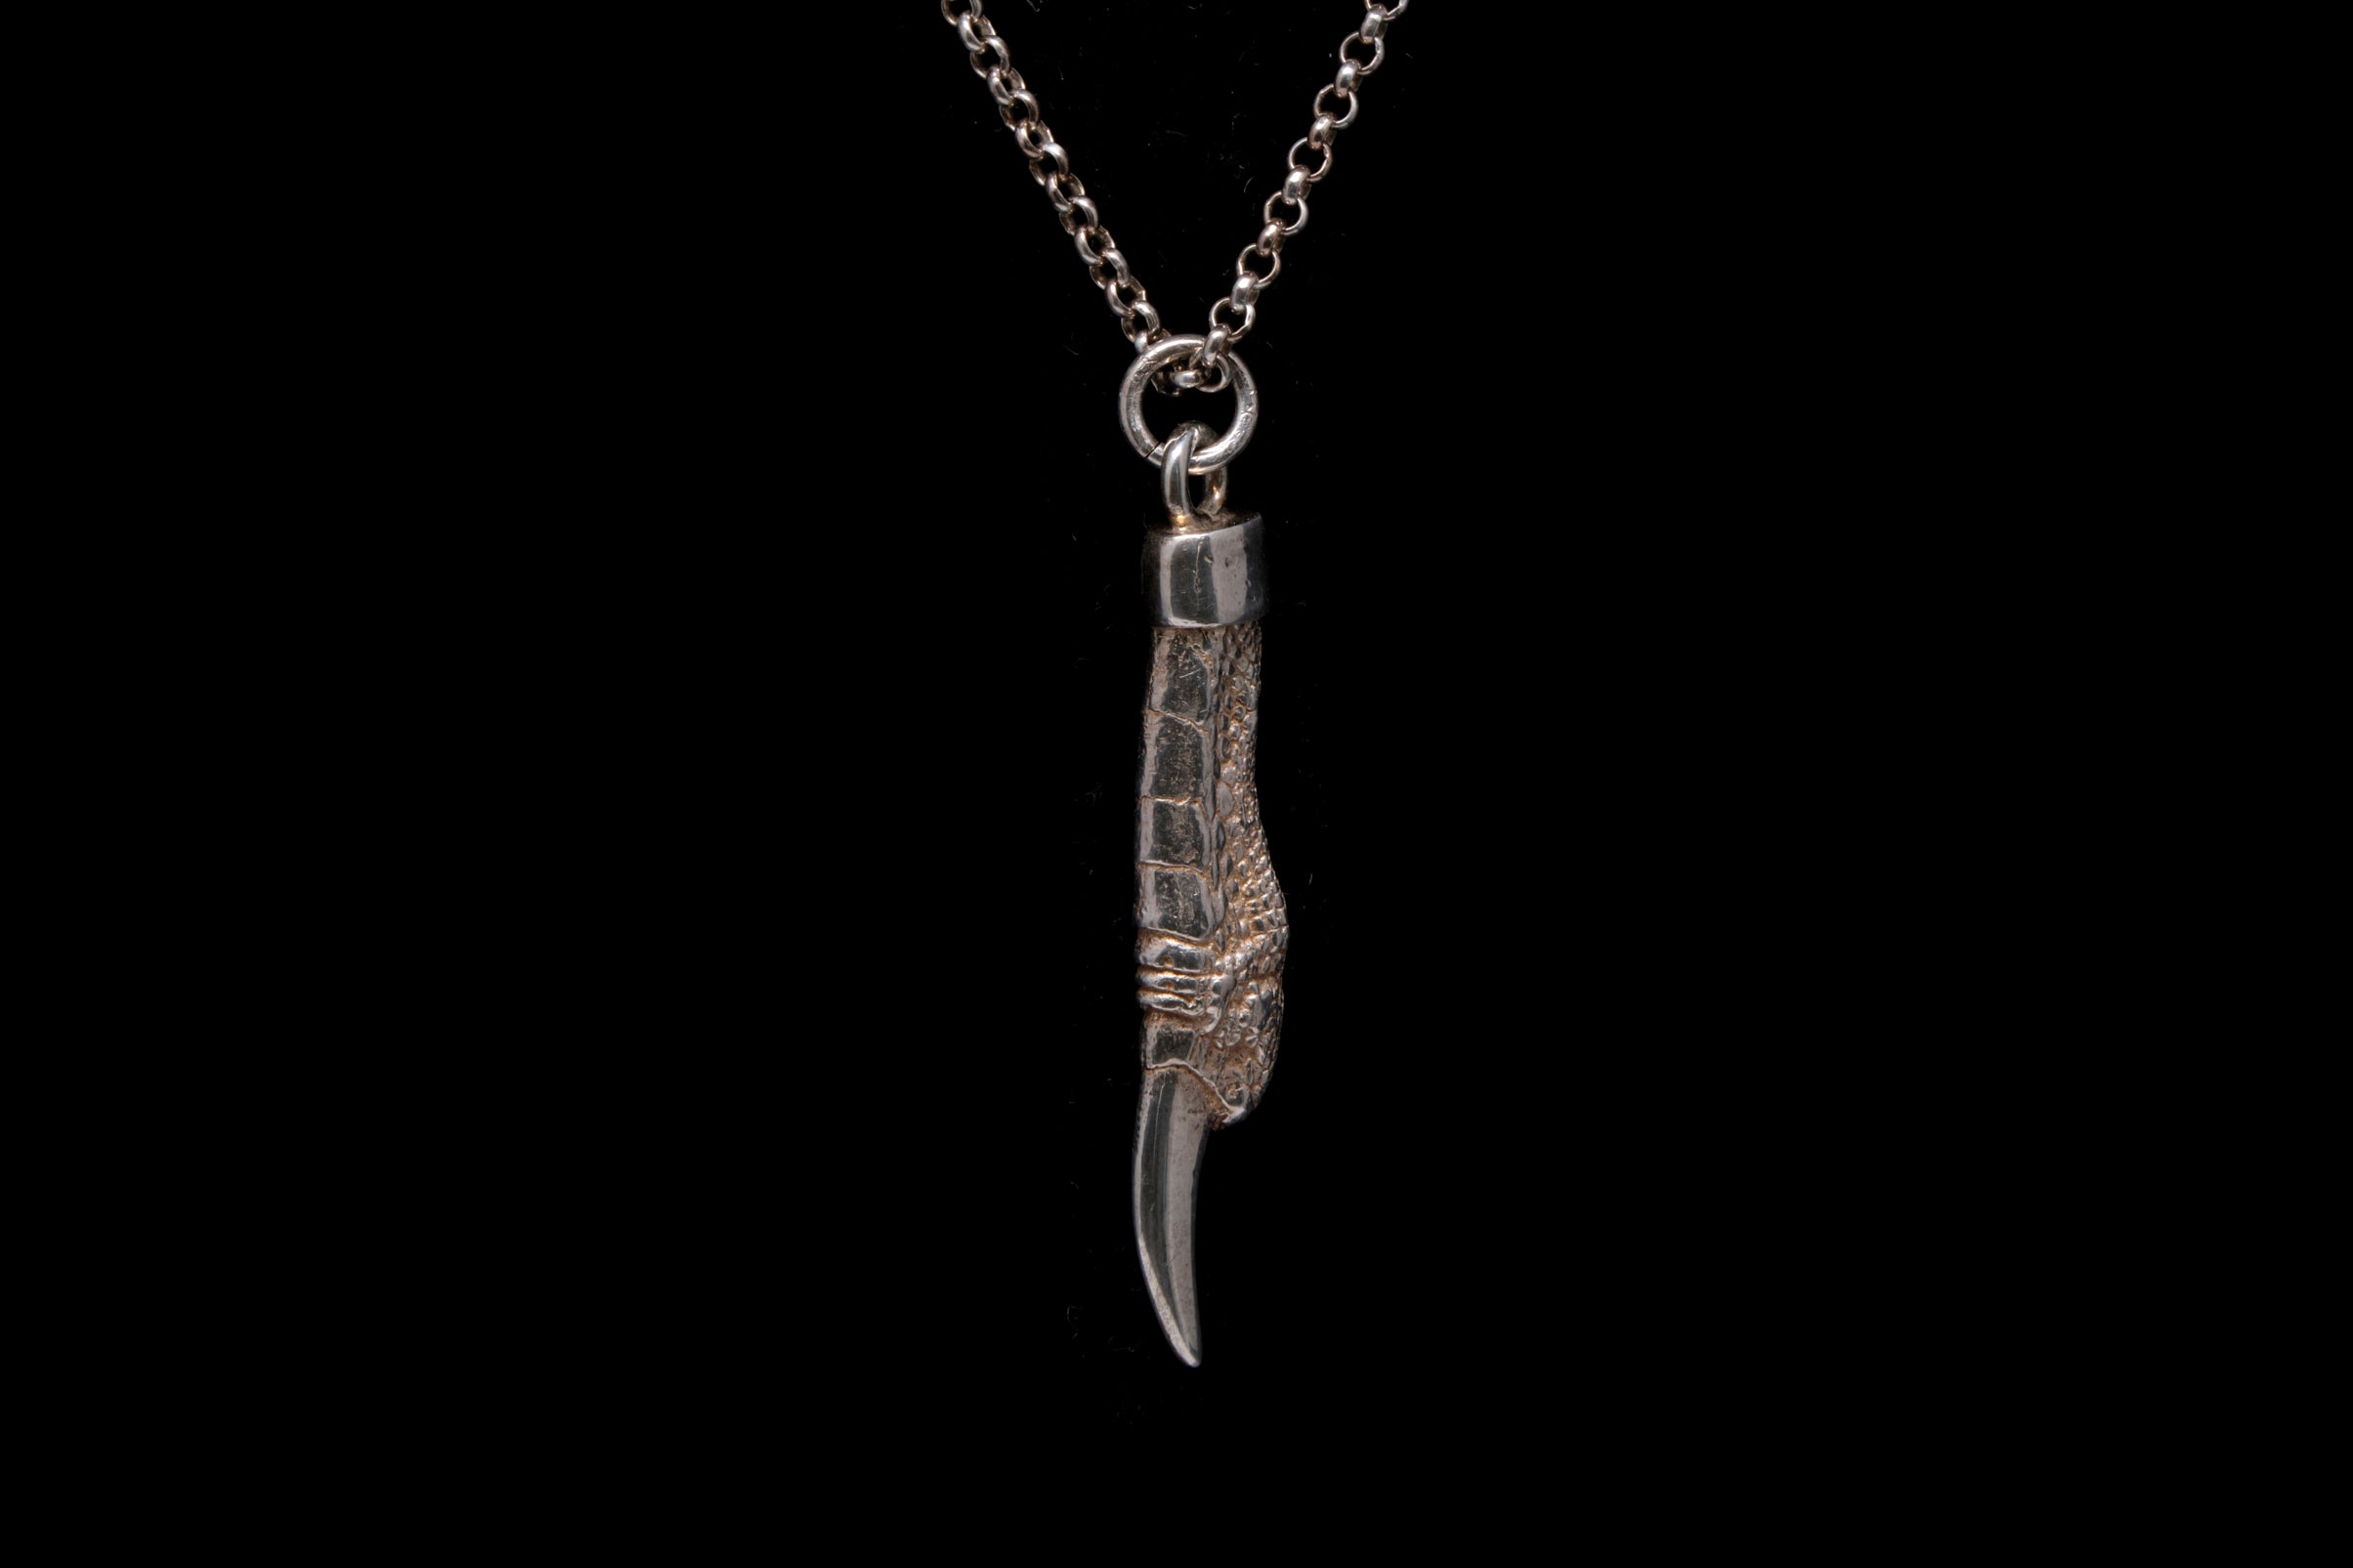 Deadly Ponies "Pukeko Claw" in Sterling Silver.